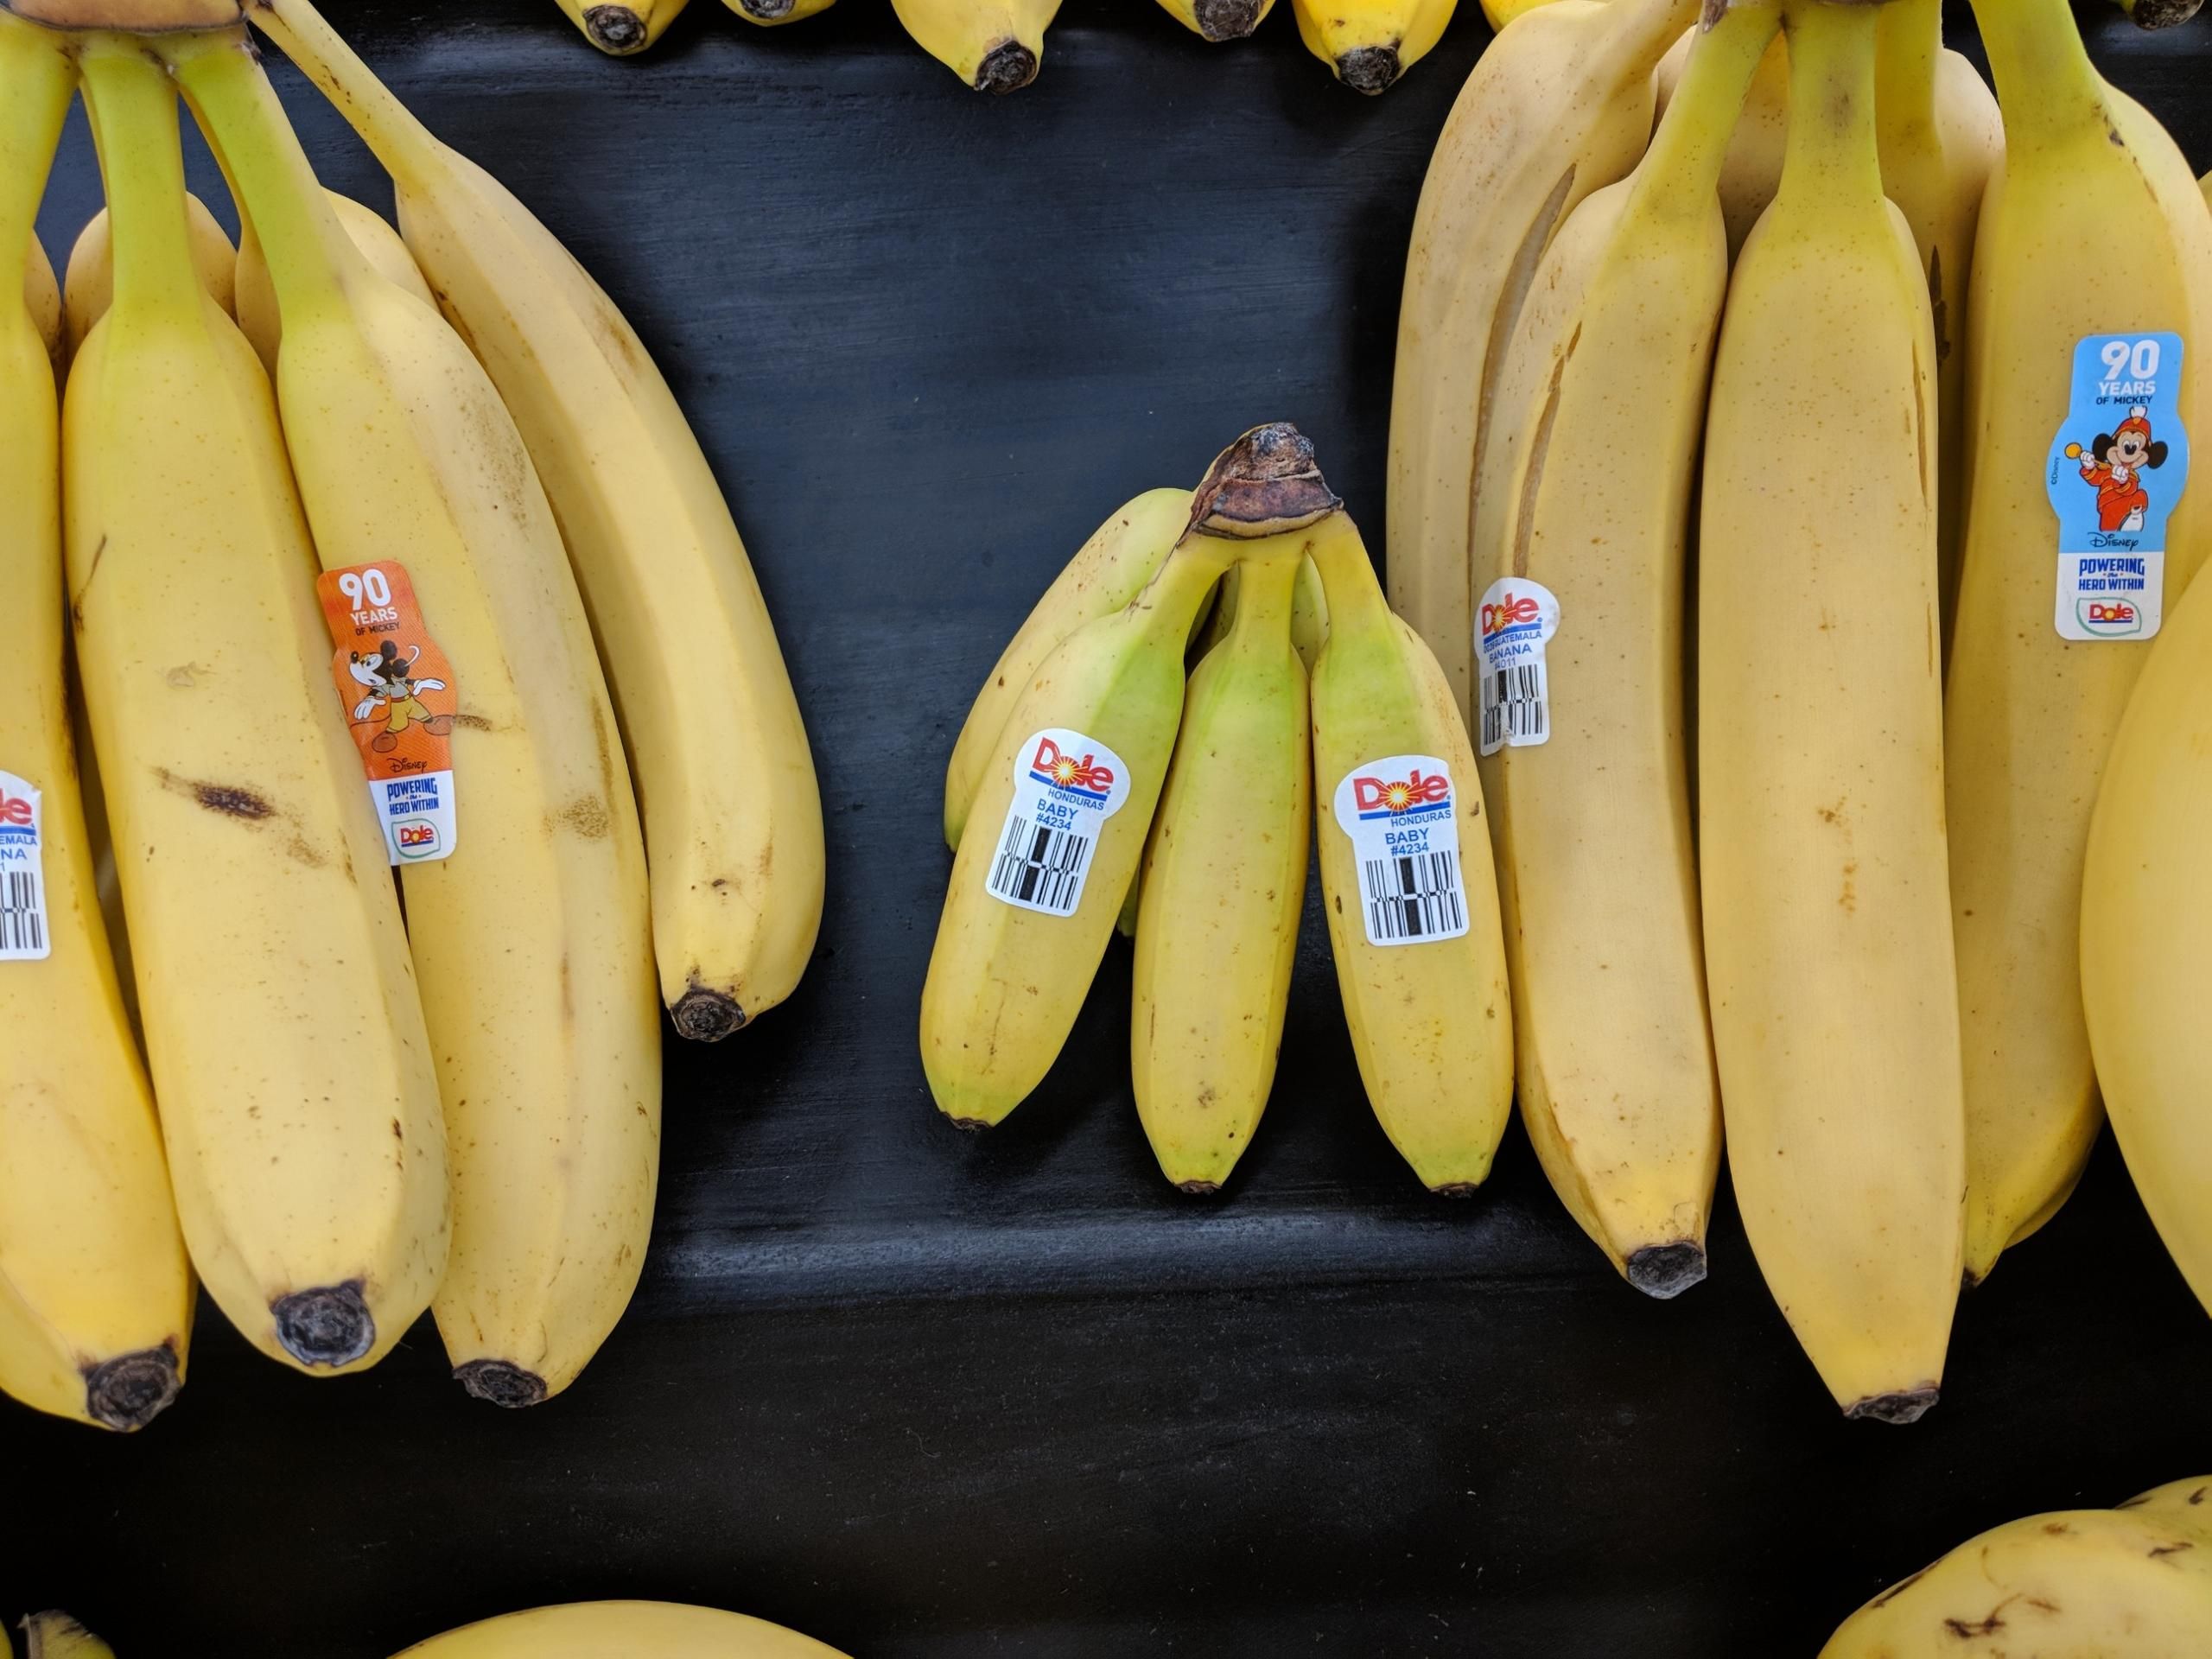 Found some small bananas. Bananas for scale.